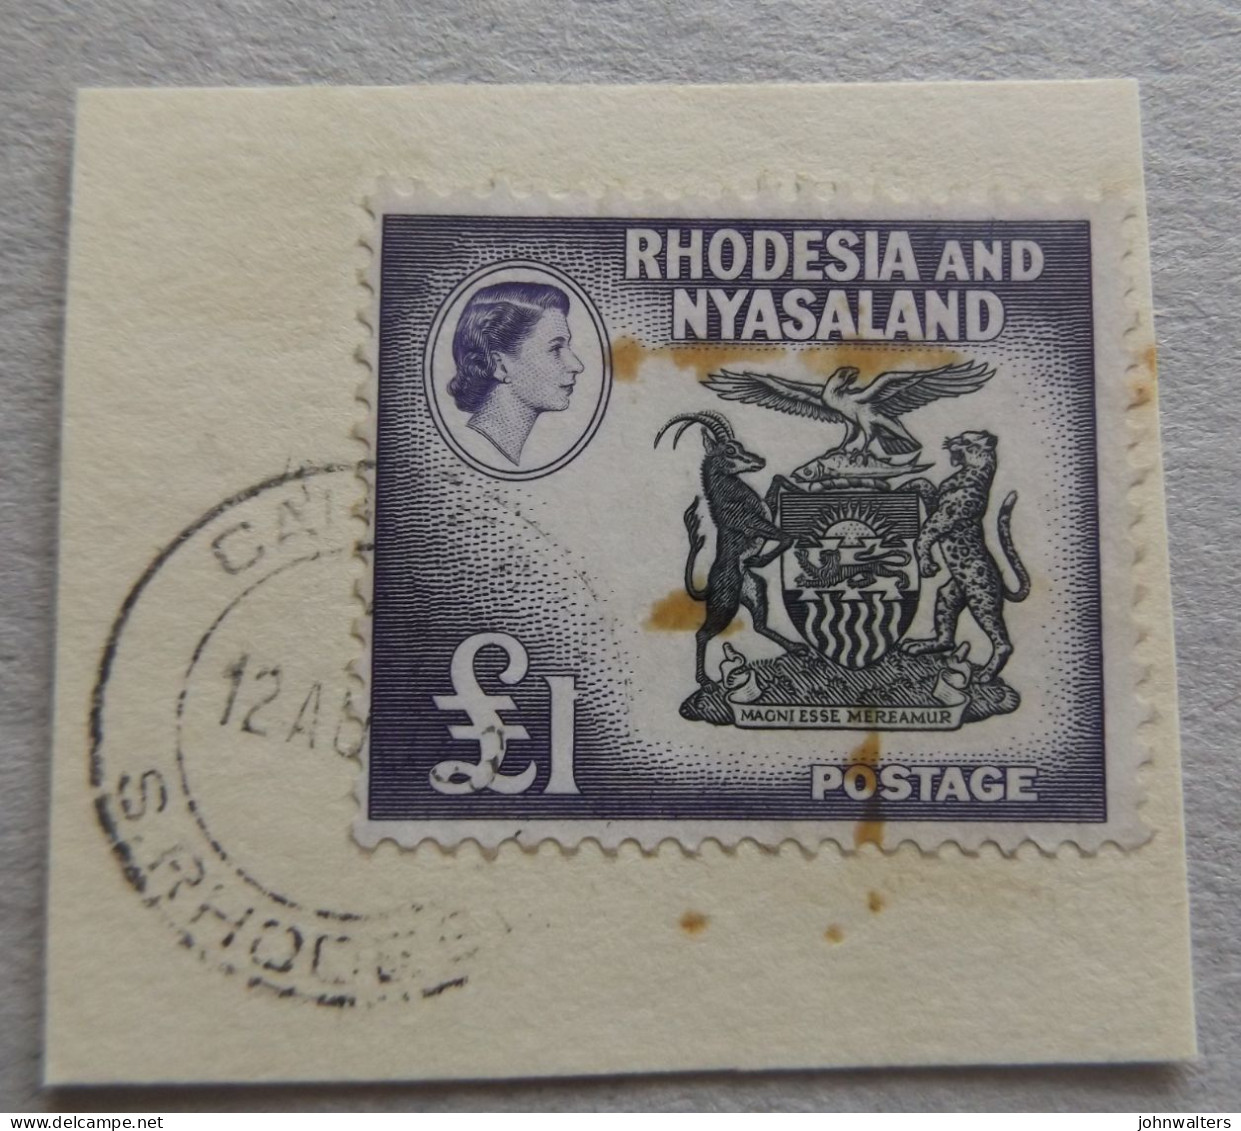 1959 Rhodesia & Nyasaland £1 Definitive Used On Piece Postmarked 12 Aug ( Day If Issue ) Stains - Rhodesia & Nyasaland (1954-1963)